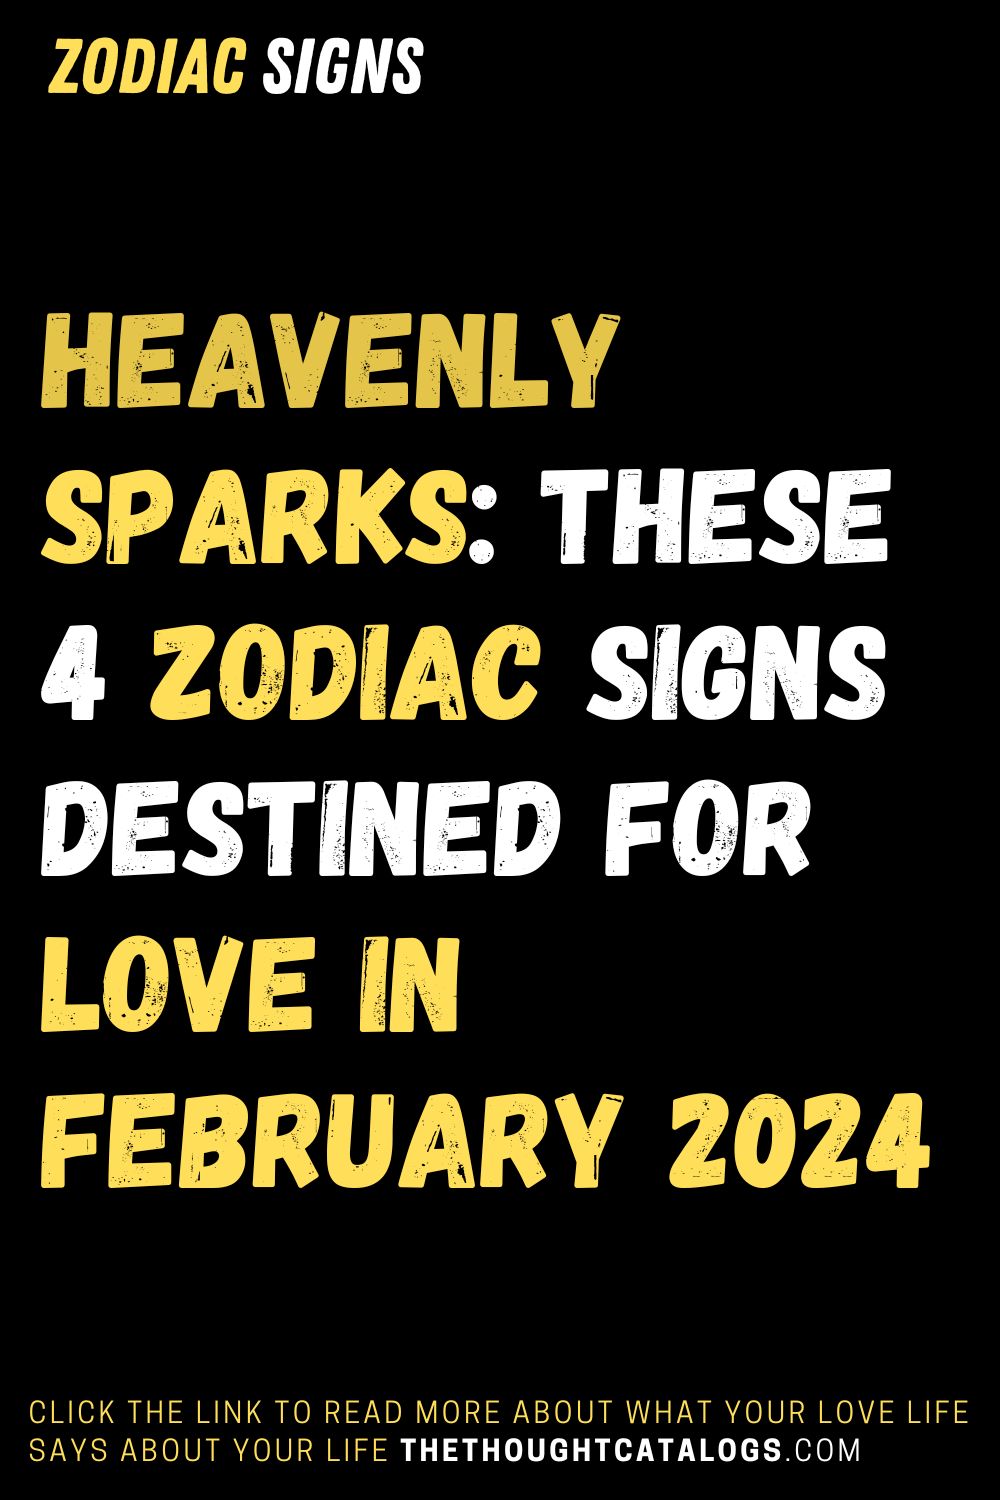 Heavenly Sparks: These 4 Zodiac Signs Destined For Love In February 2024